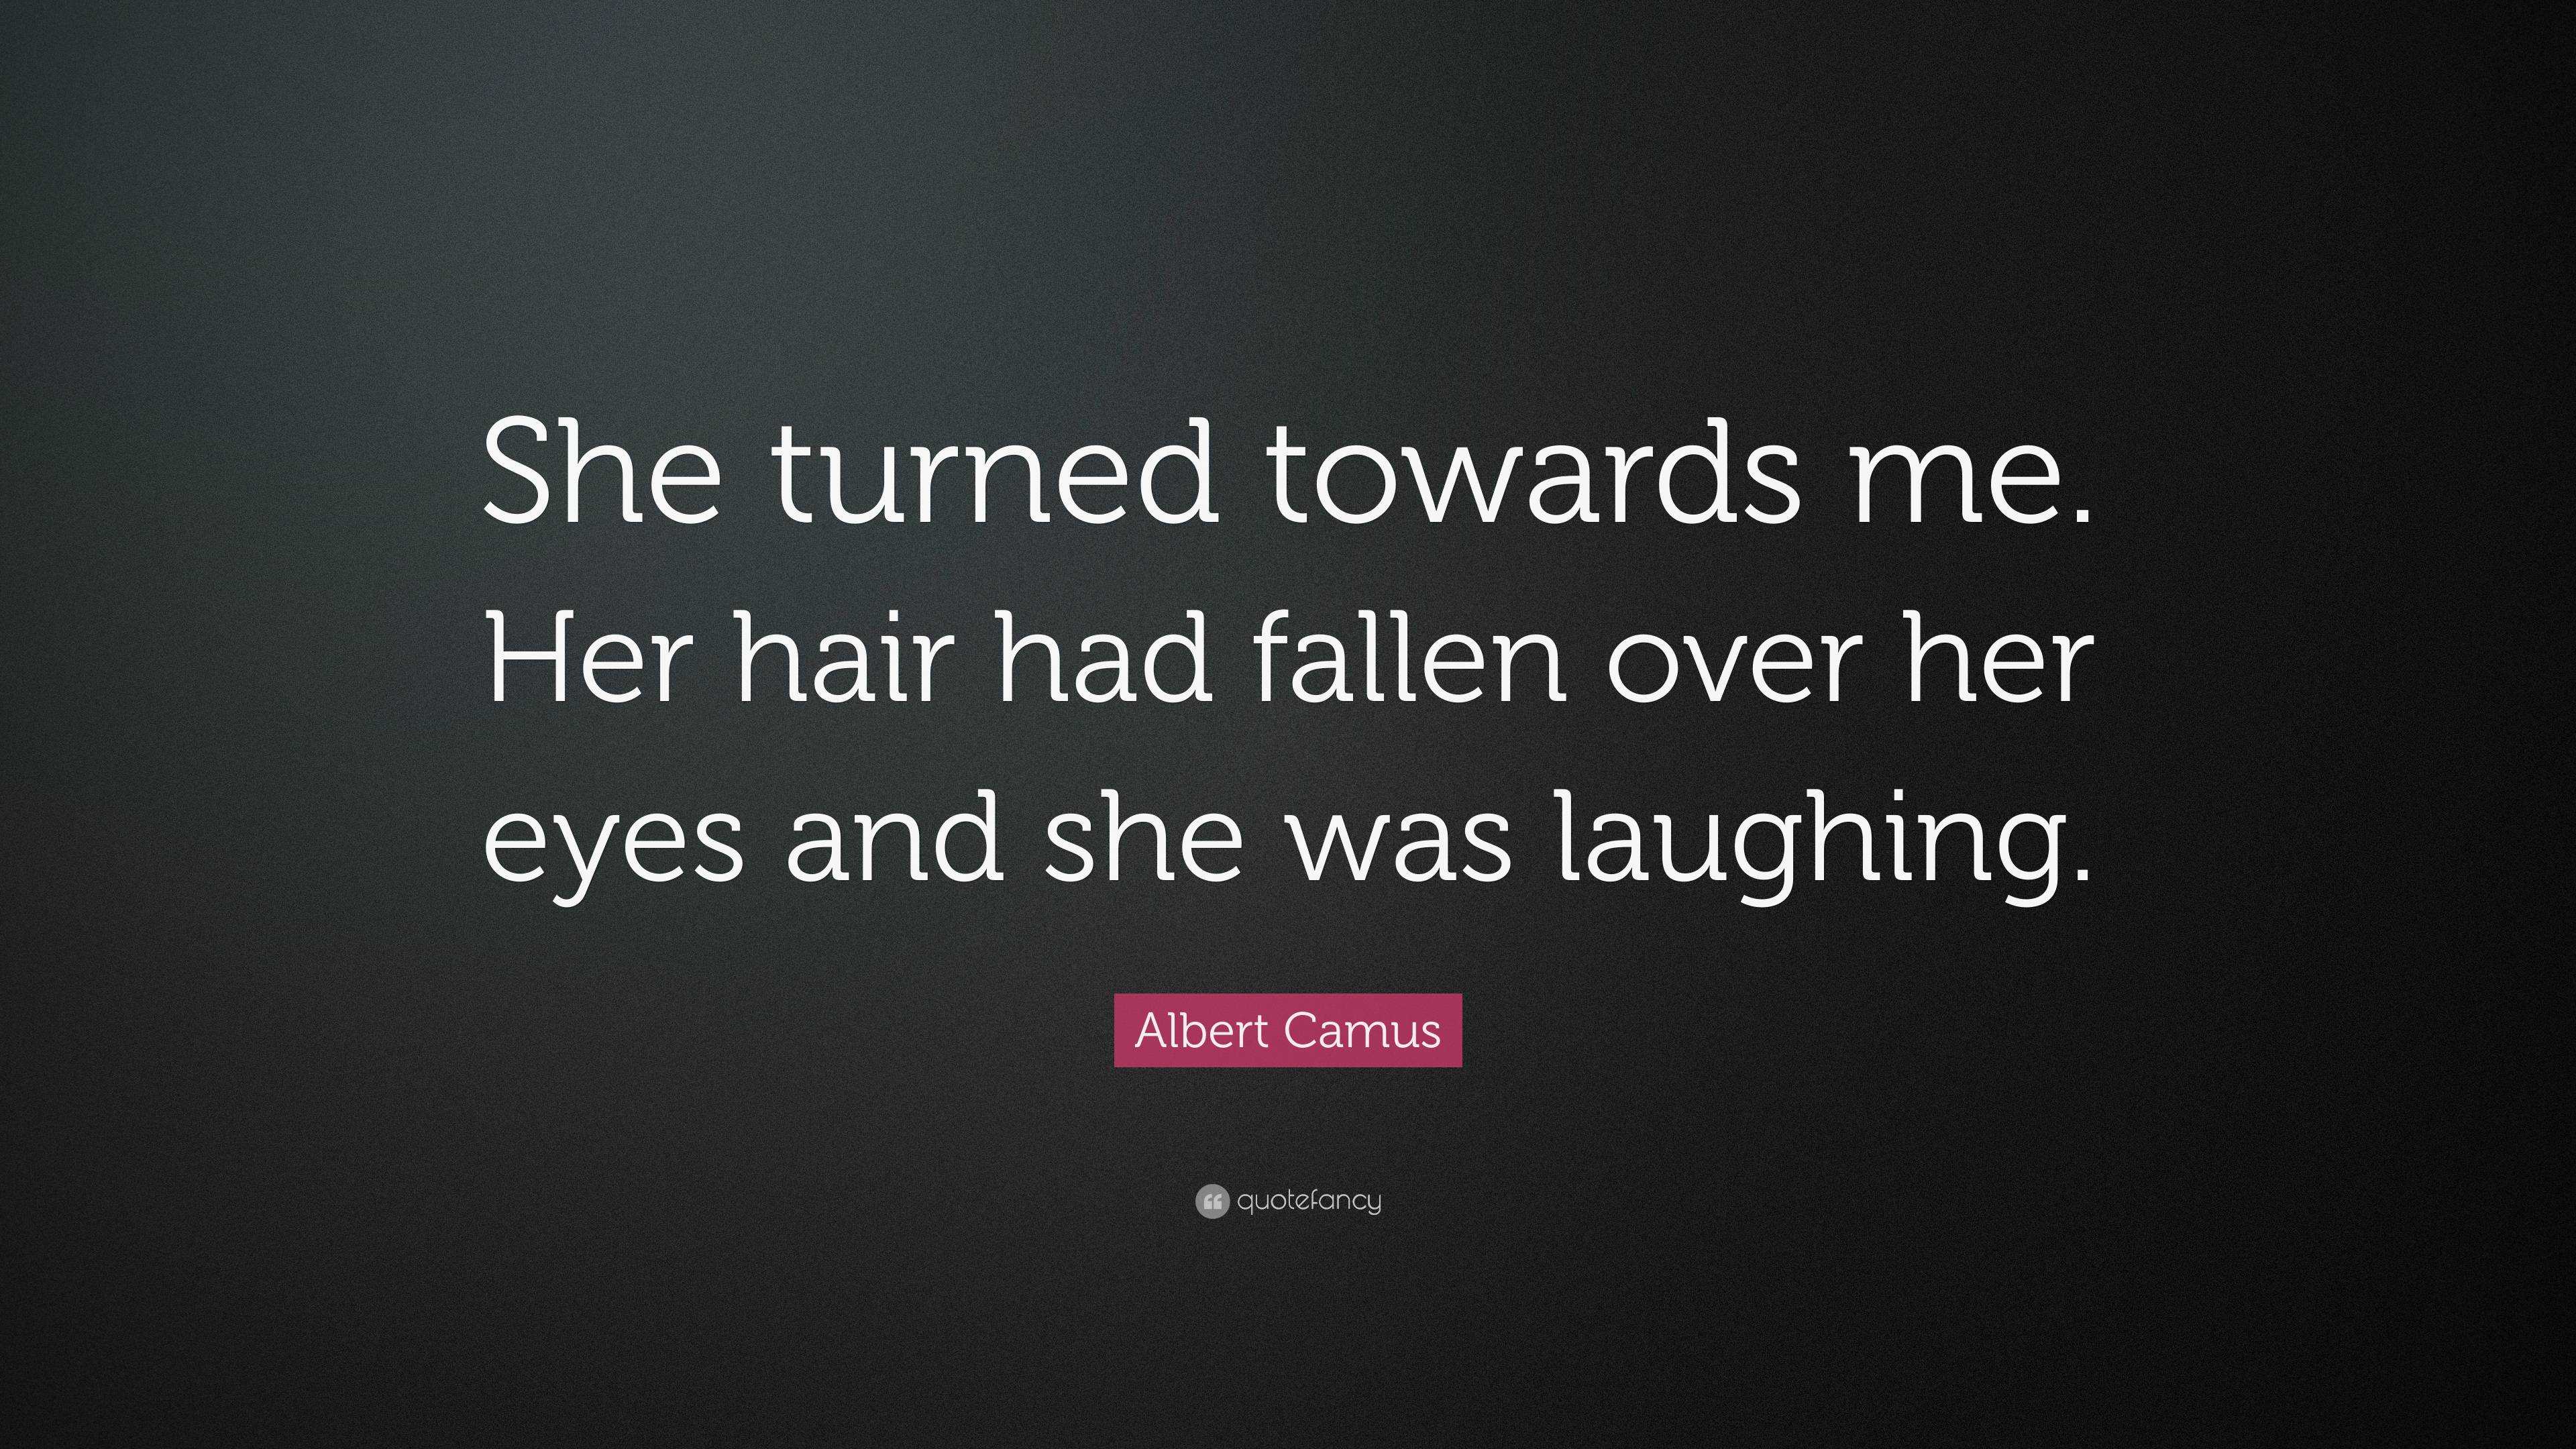 Albert Camus Quote: “She turned towards me. Her hair had fallen over ...